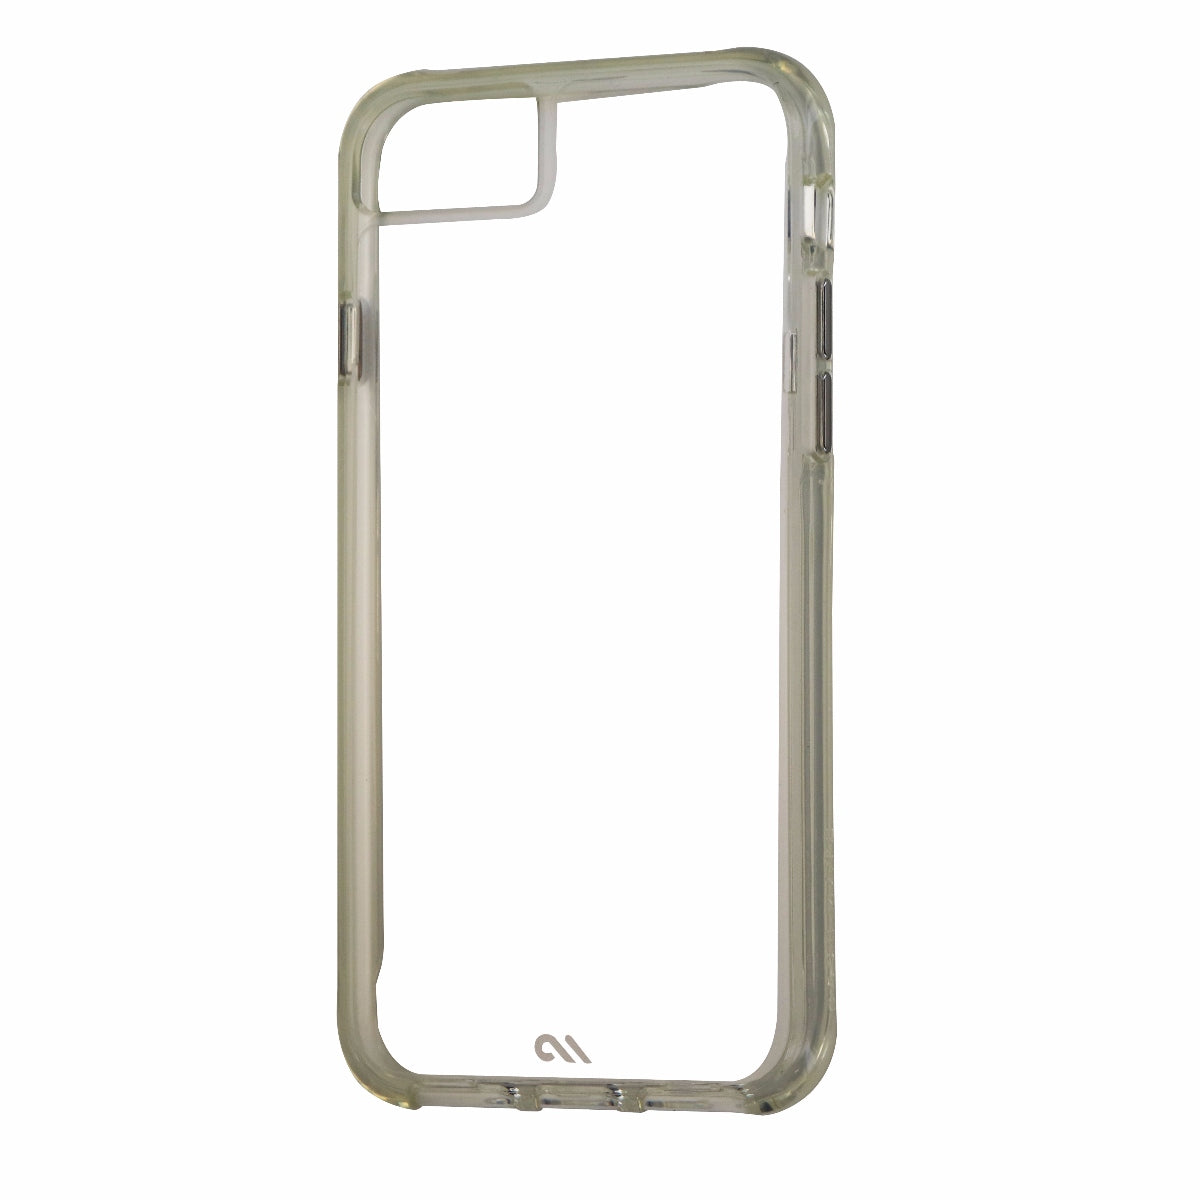 Case-Mate Tough Clear Series Protective Case Cover for iPhone 8 7 - Clear